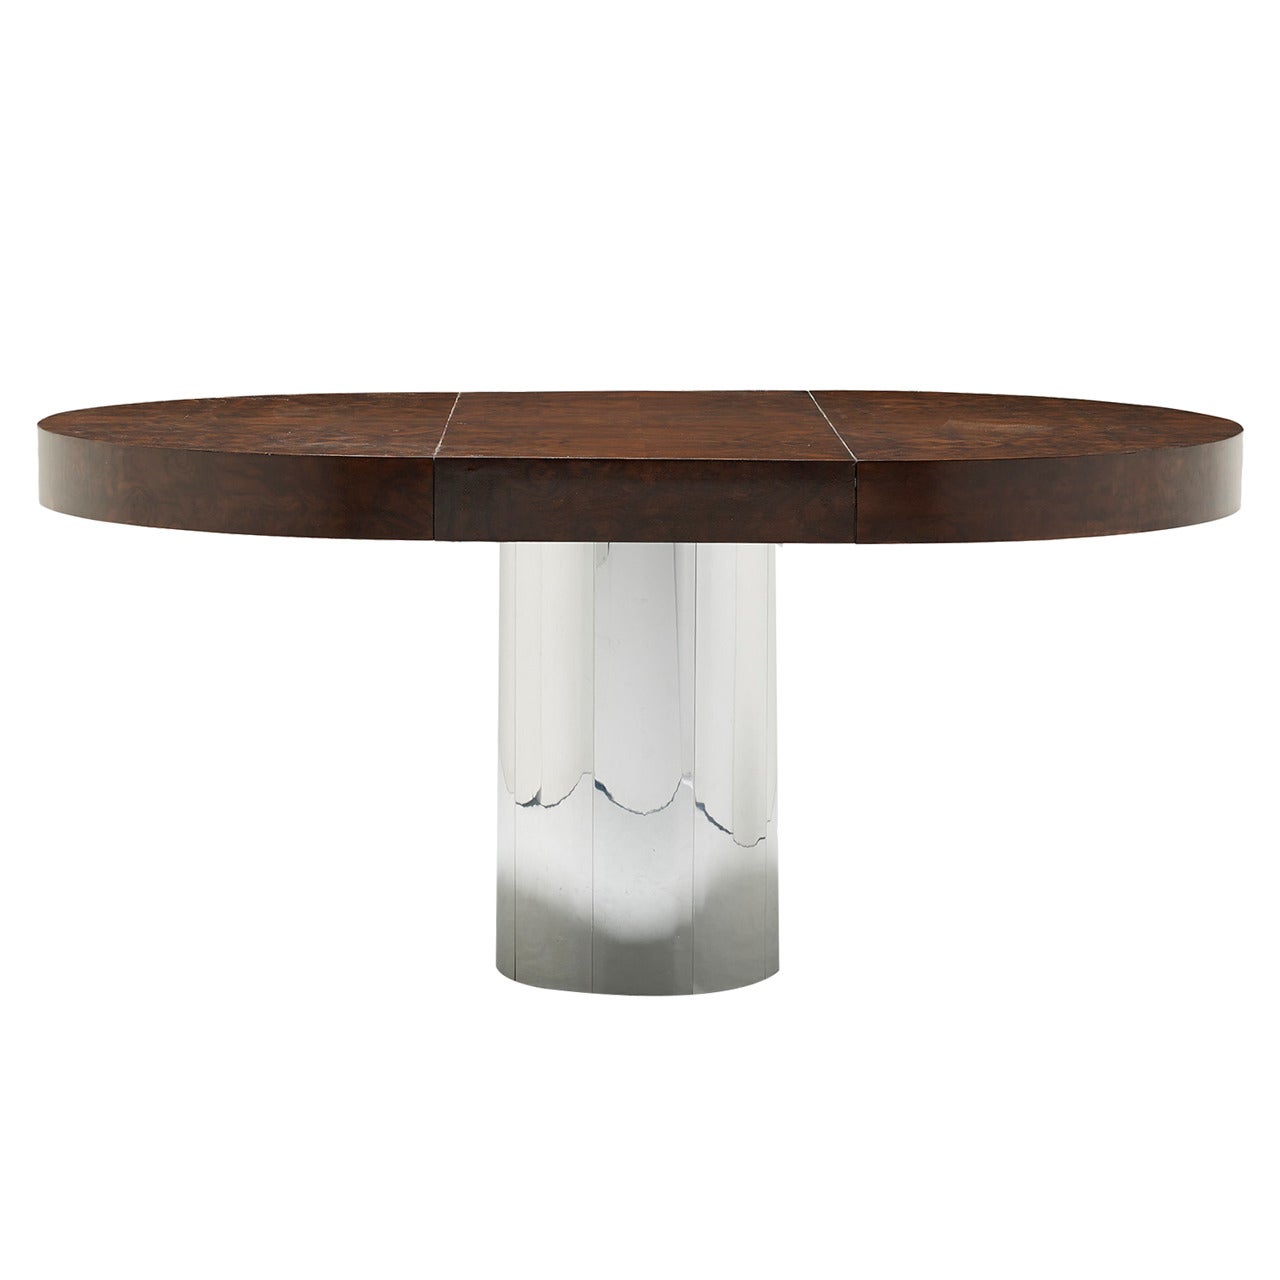 Cityscape dining table by Paul Evans Studio for Directional